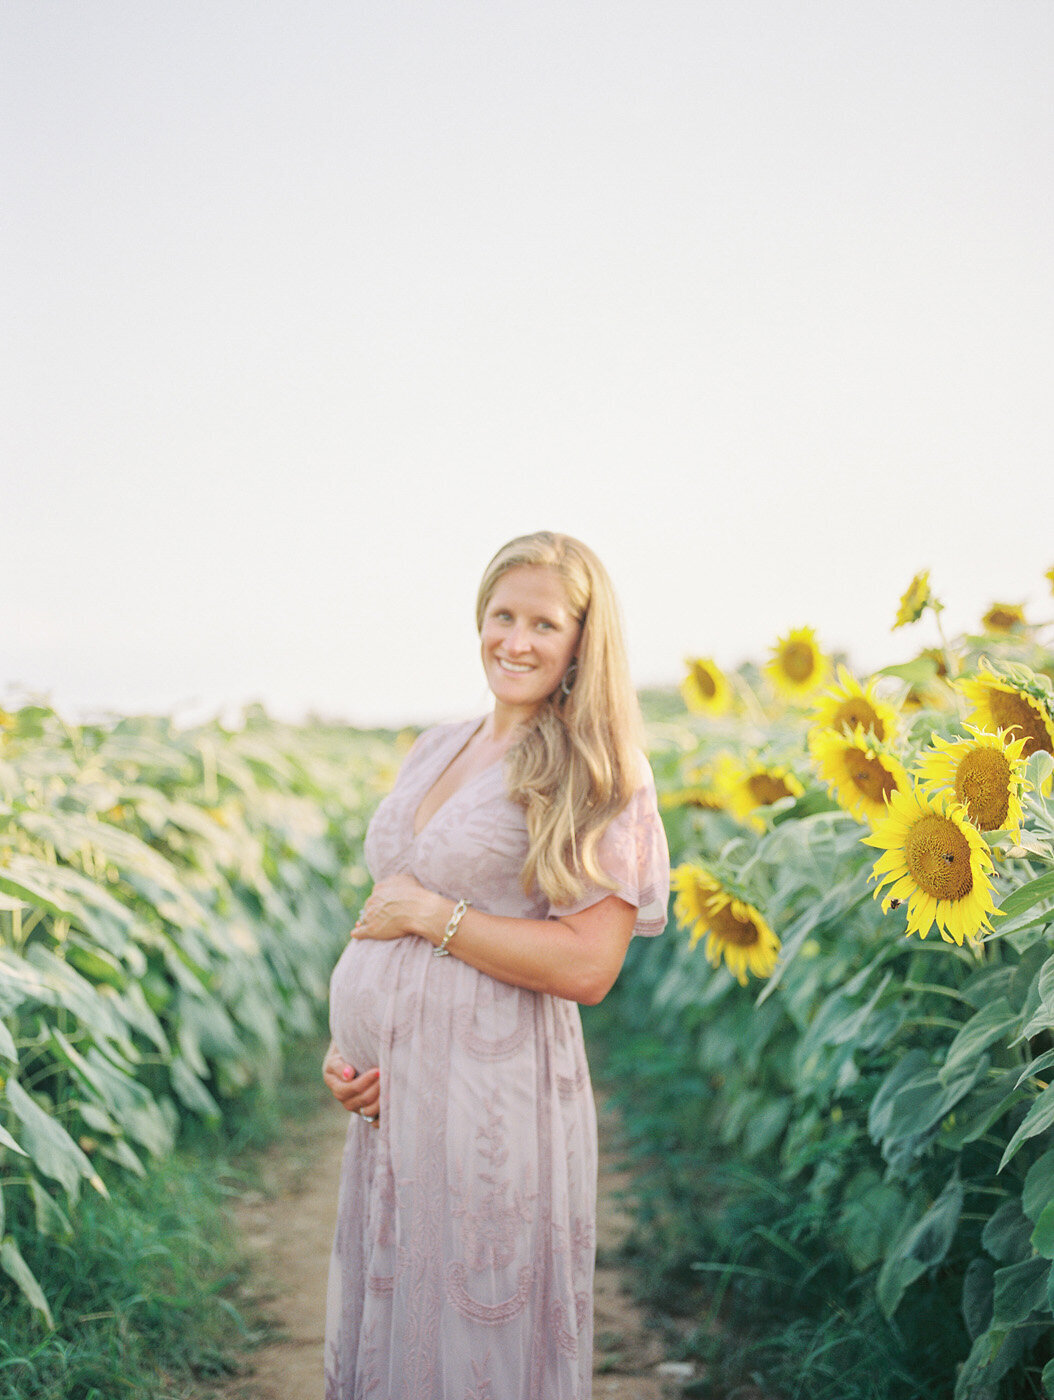 Raleigh Maternity Photographer | Jessica Agee Photography - 011